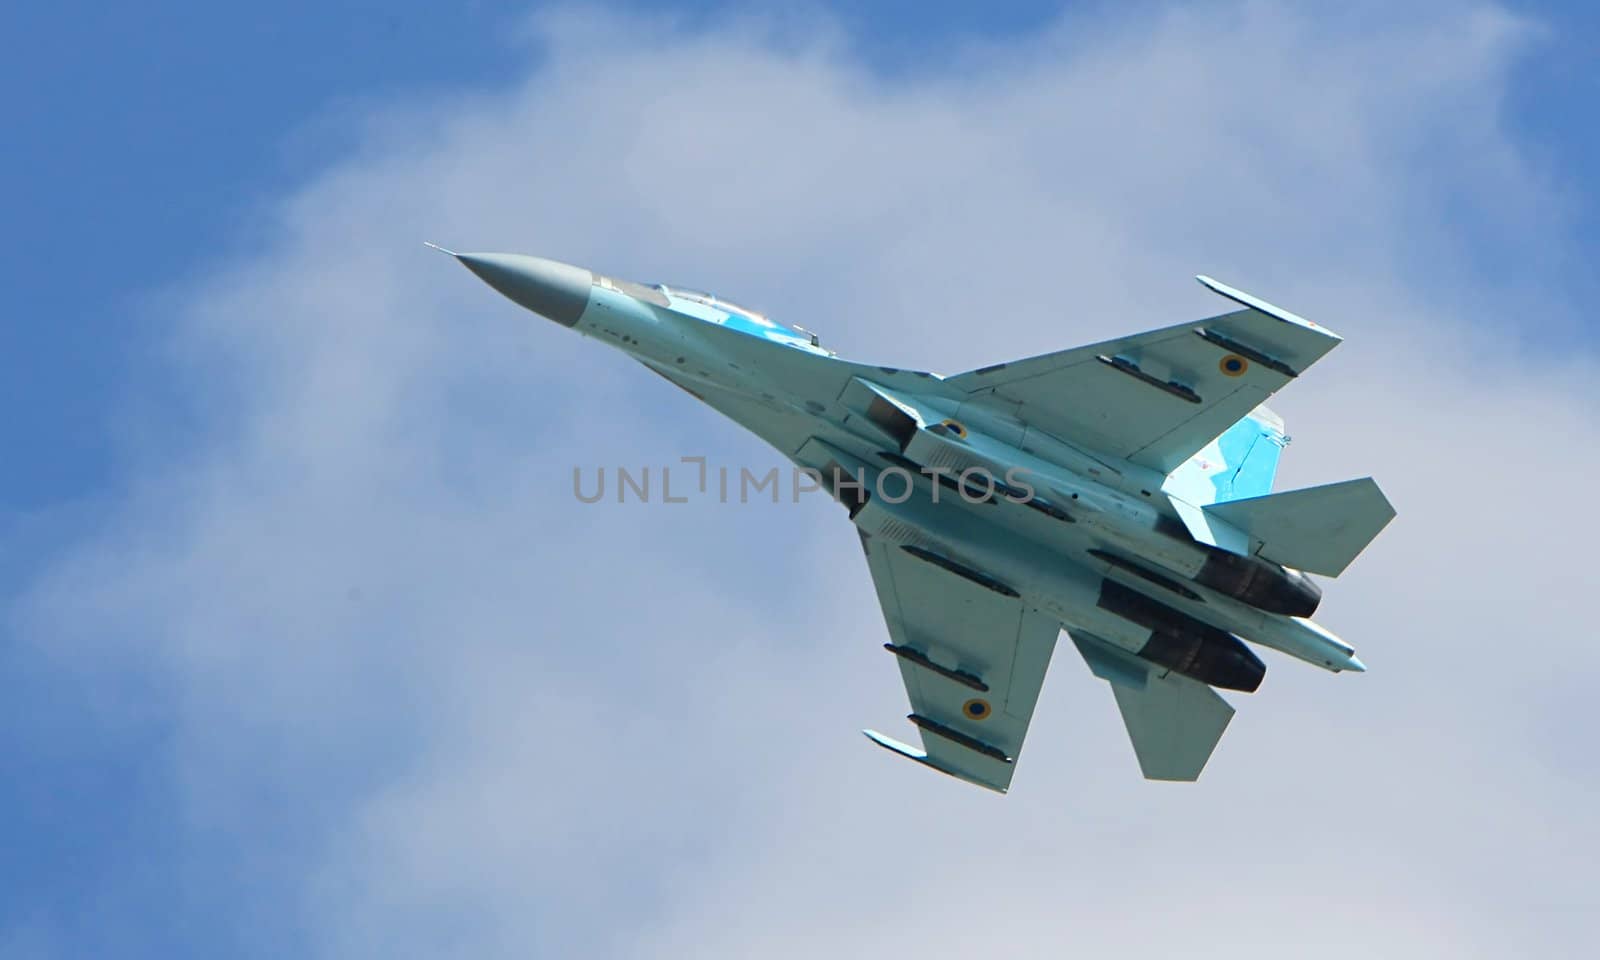 Su-27 jet fighter performing during an Airshow